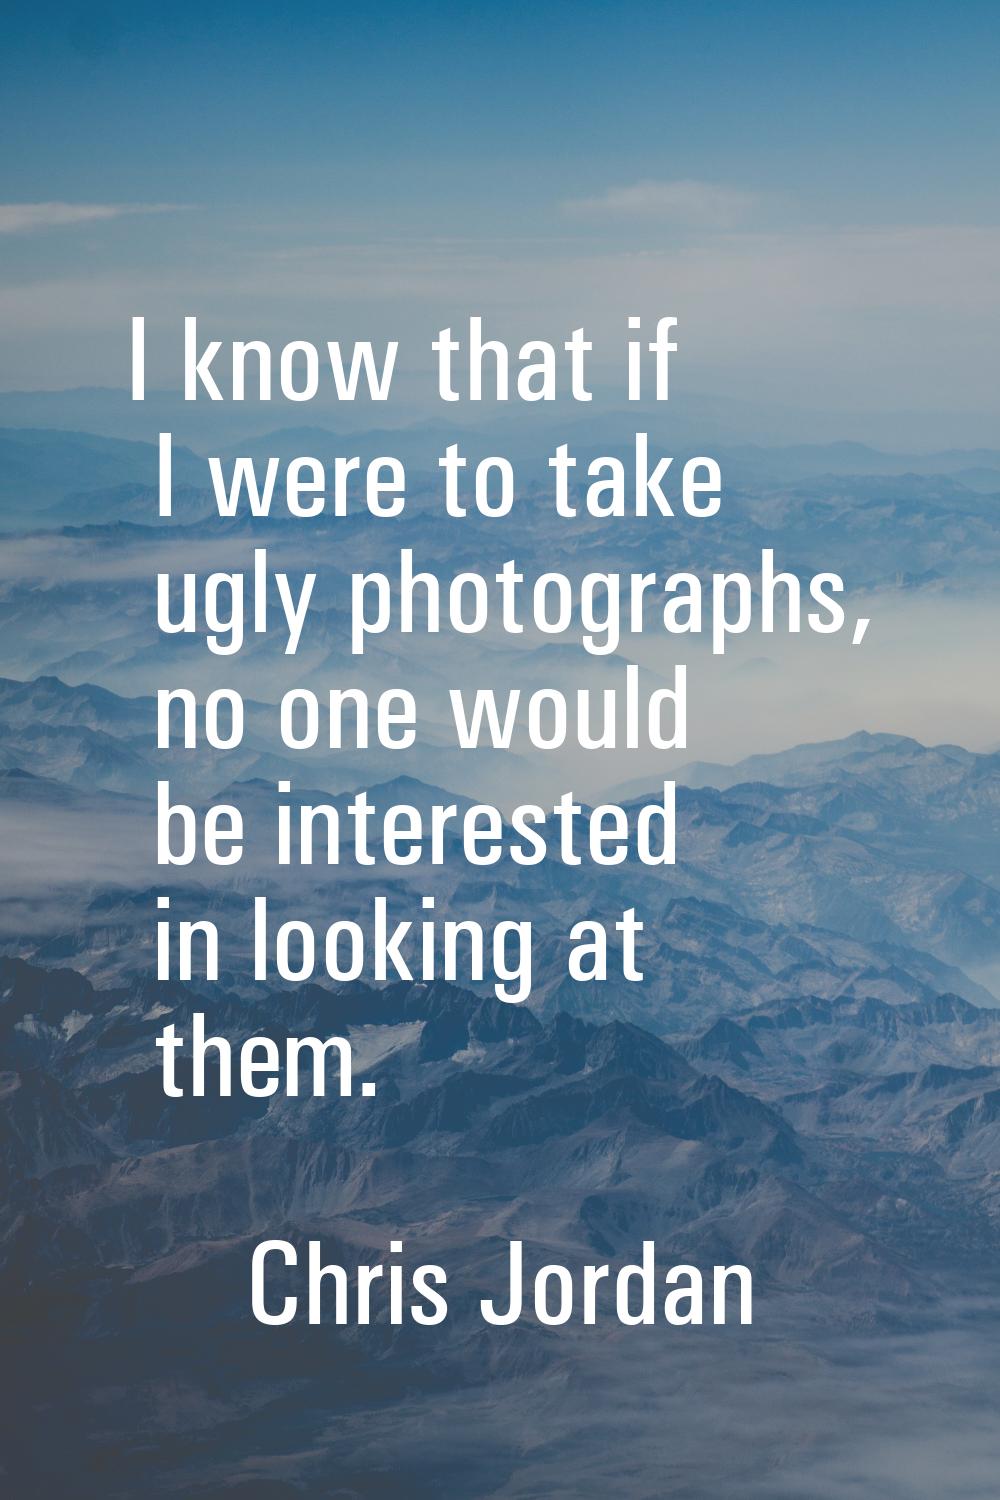 I know that if I were to take ugly photographs, no one would be interested in looking at them.